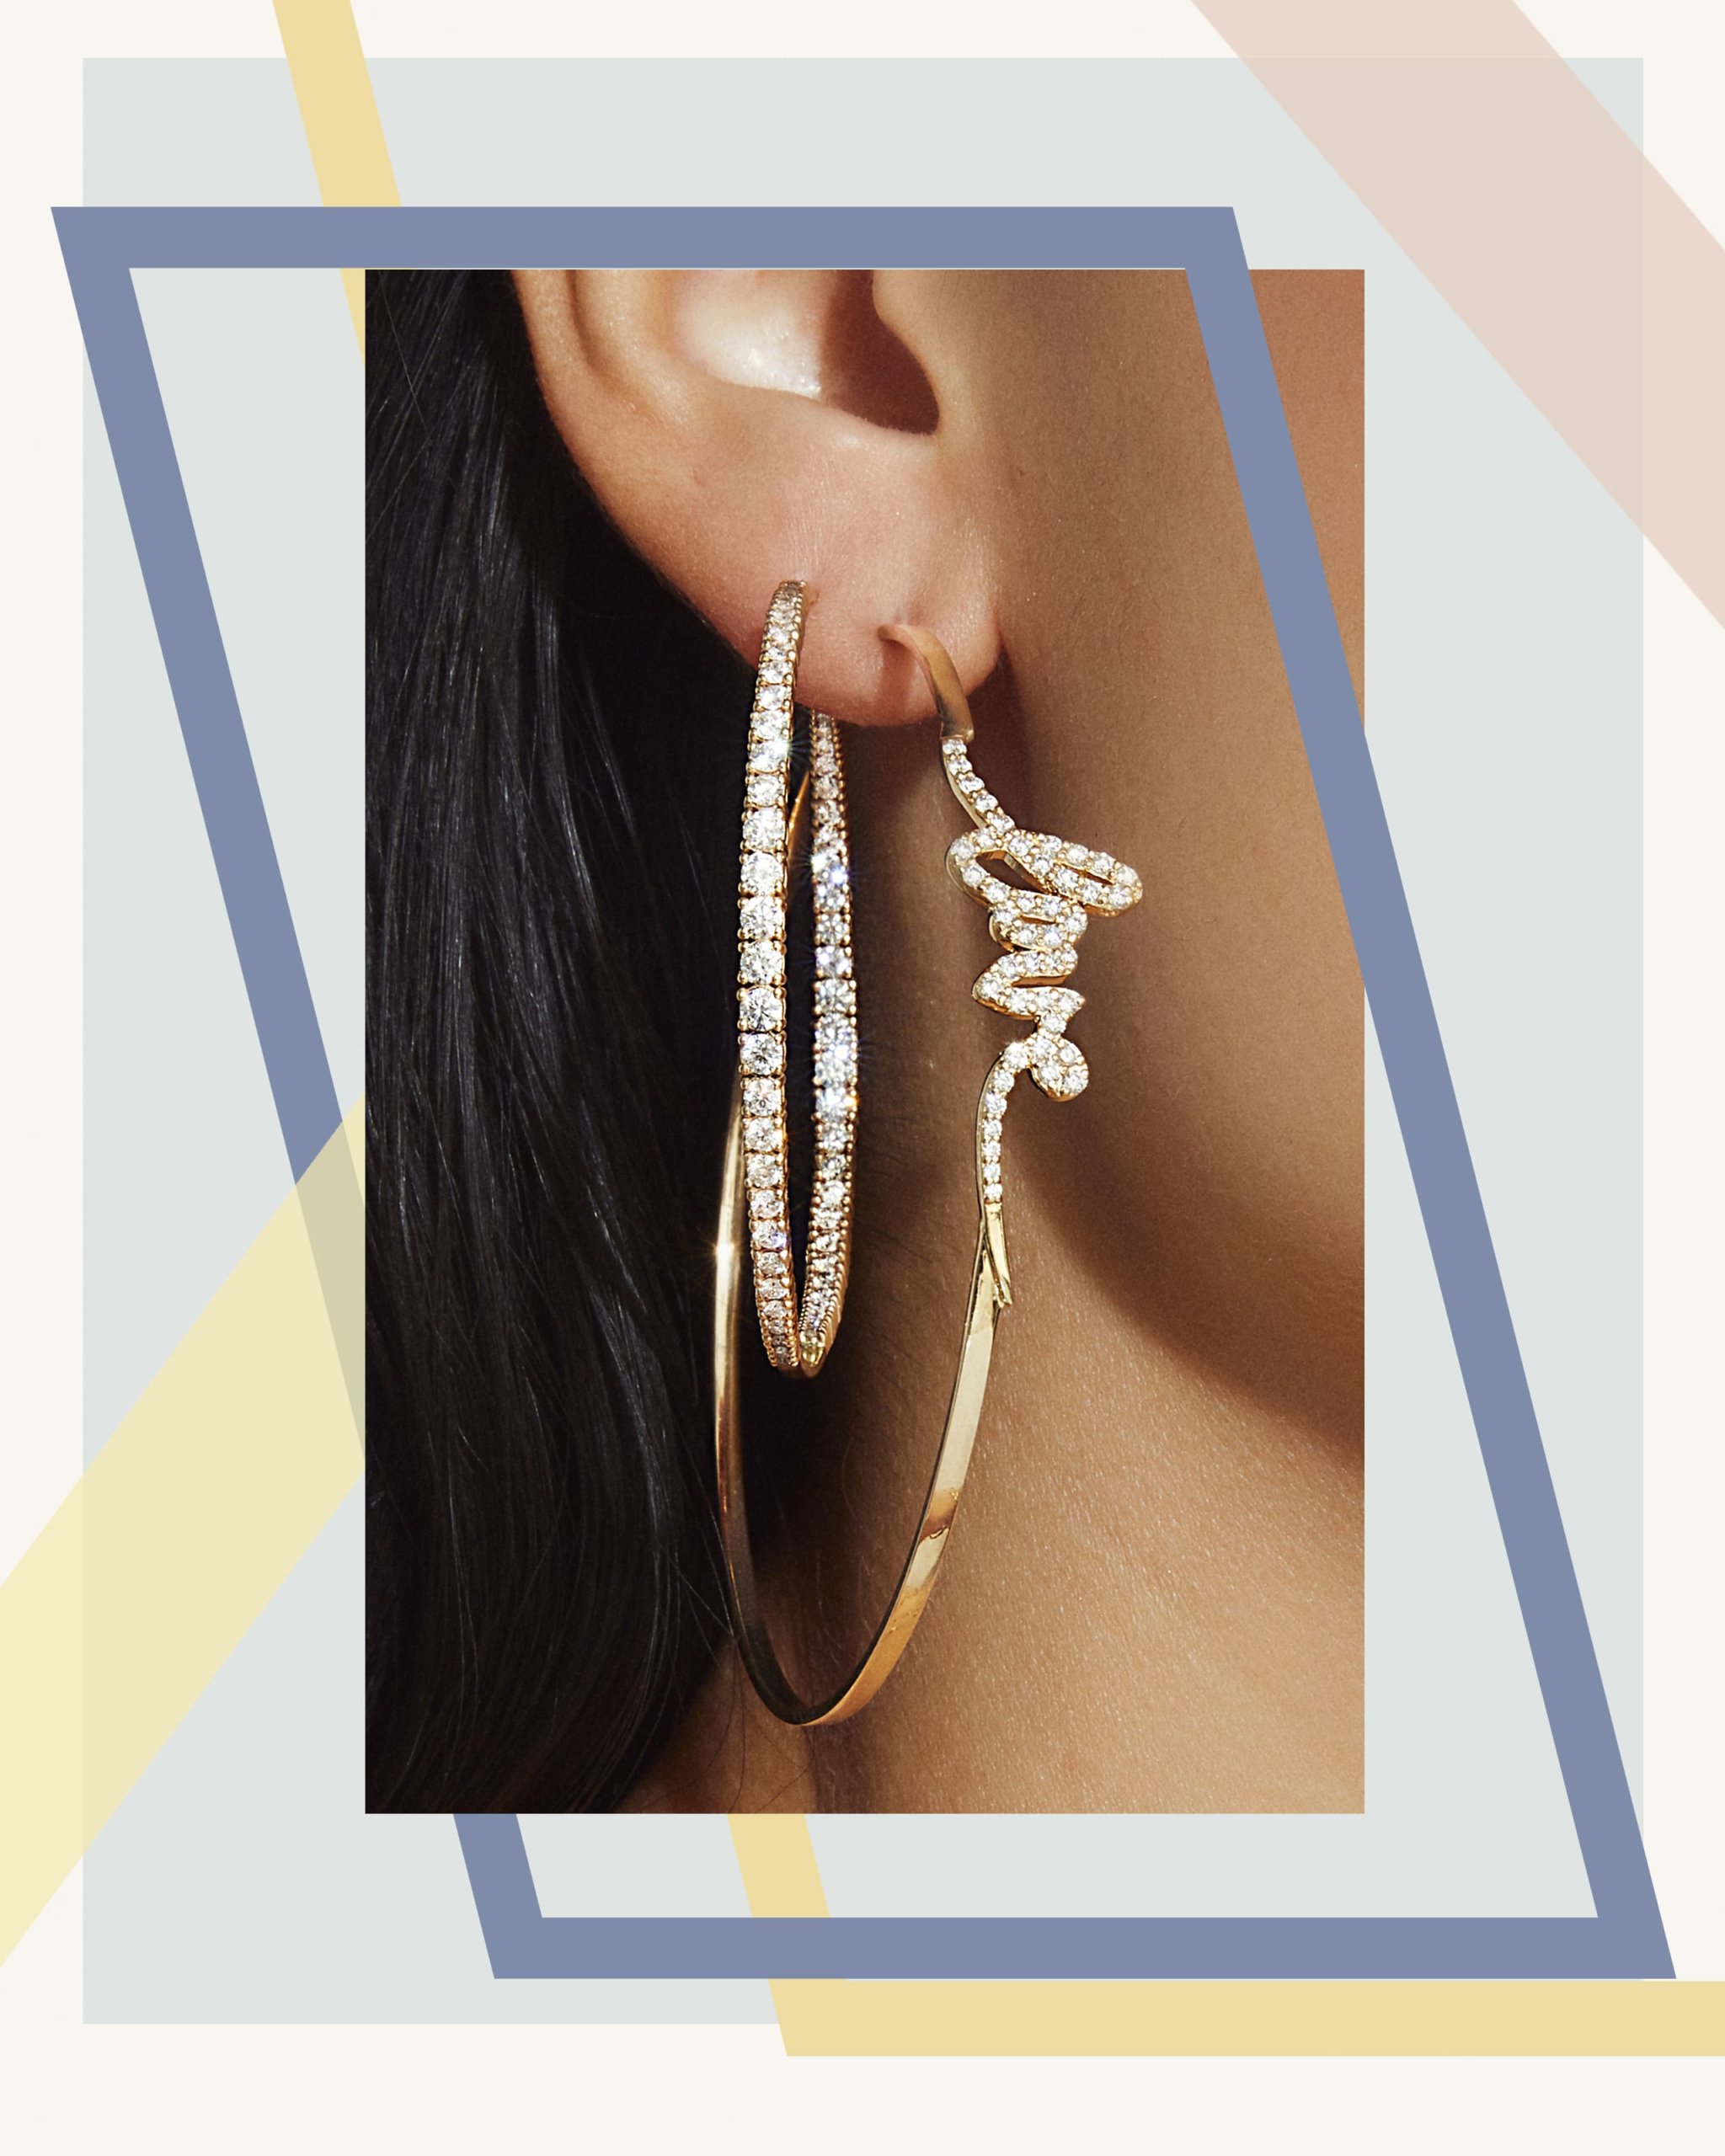 Diamond hoop earring paired with love hoop earring in gold by Lana Jewelry